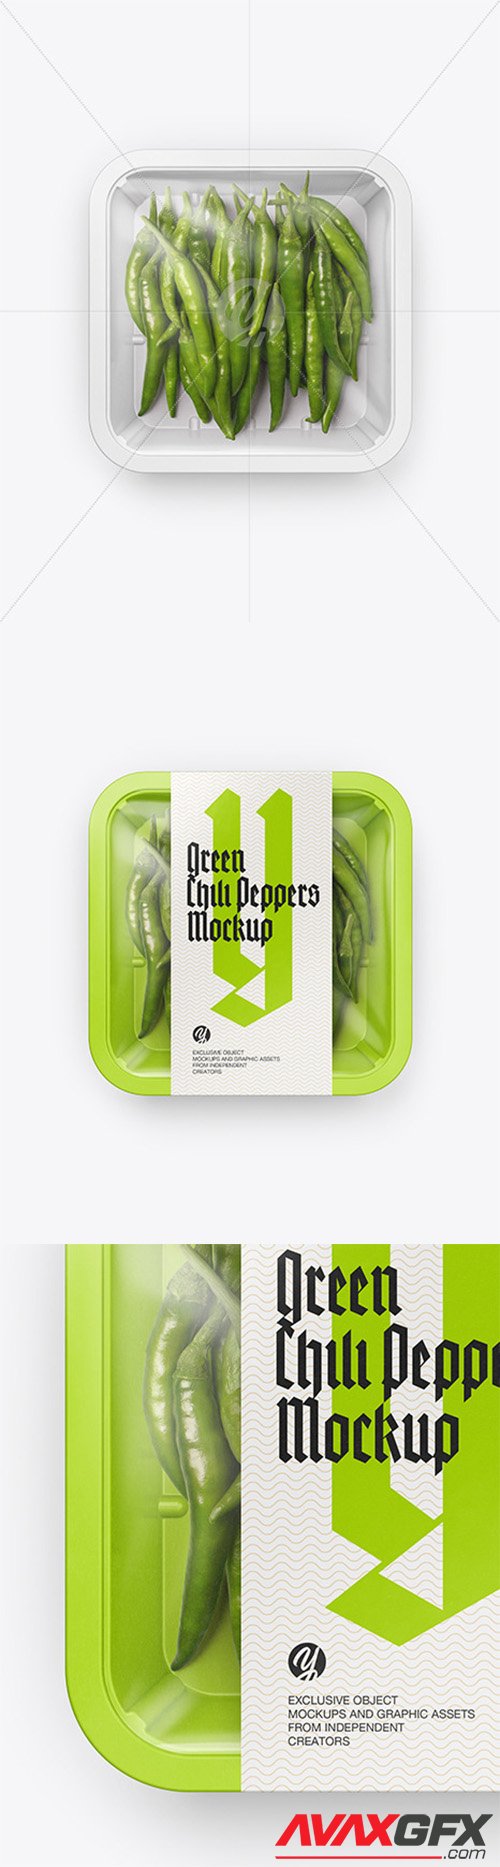 Plastic Tray With Green Chili Peppers Mockup 61578